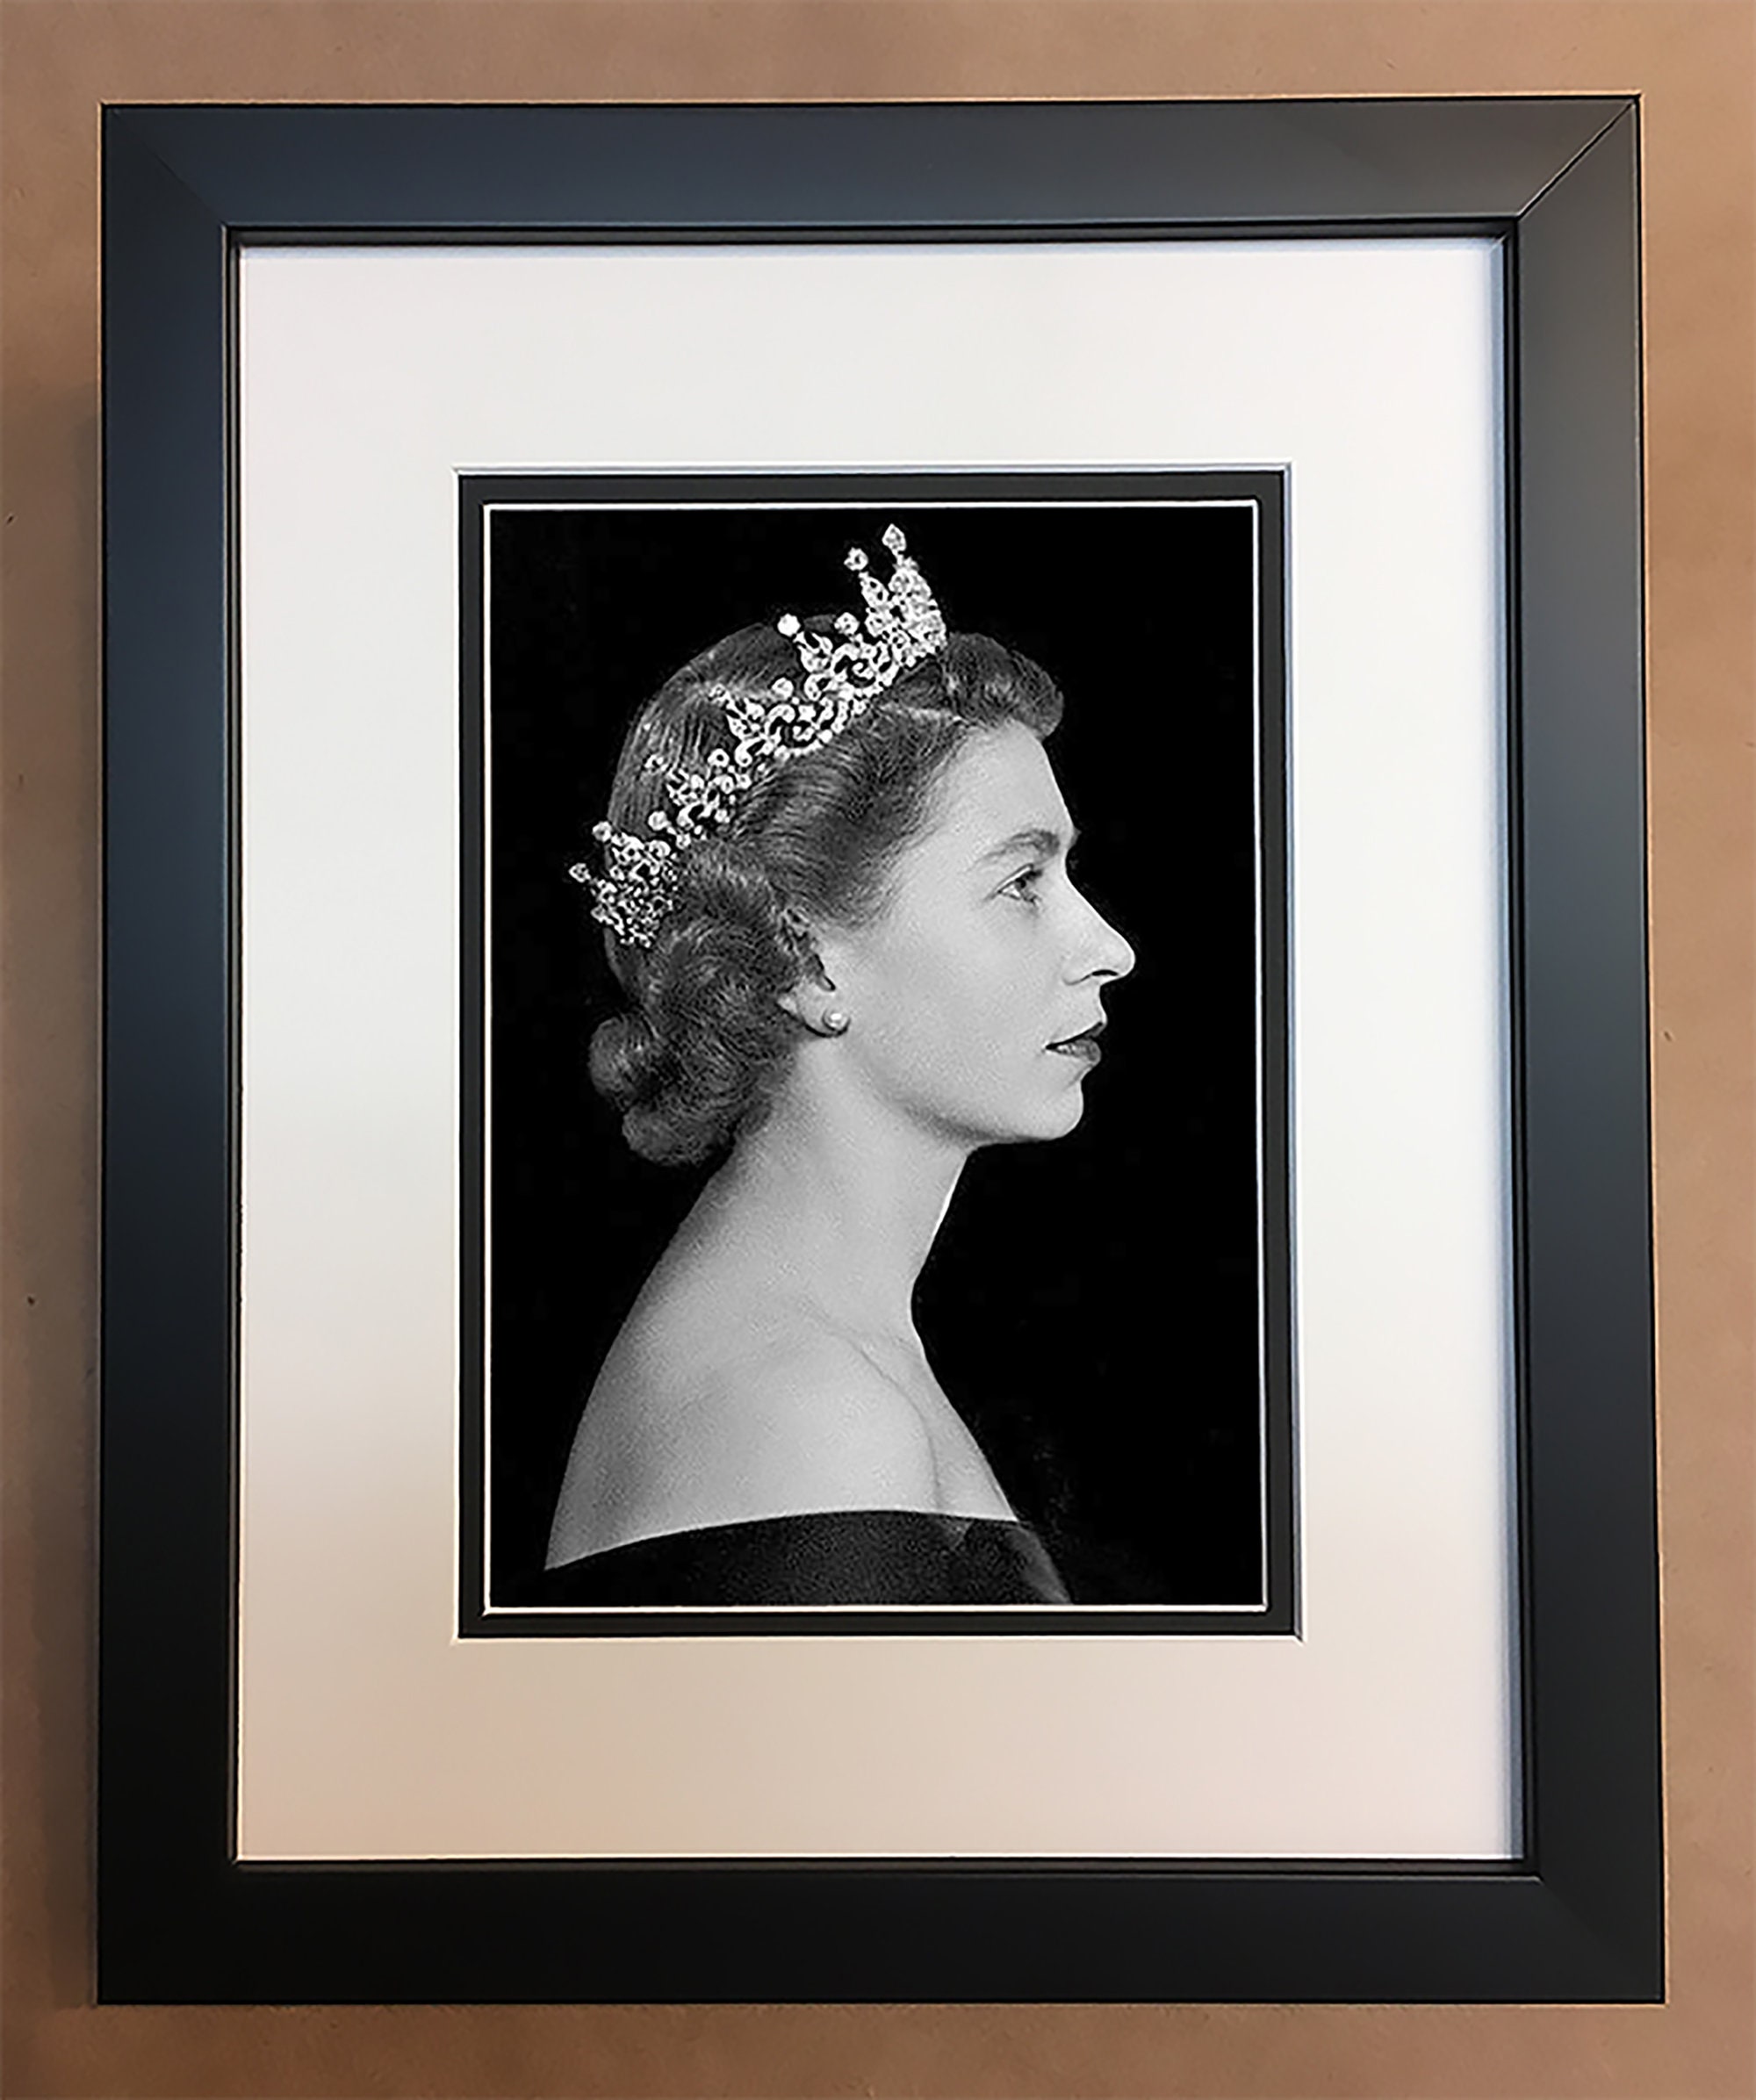 Queen Elizabeth Black and White Photo Professionally Framed | Etsy